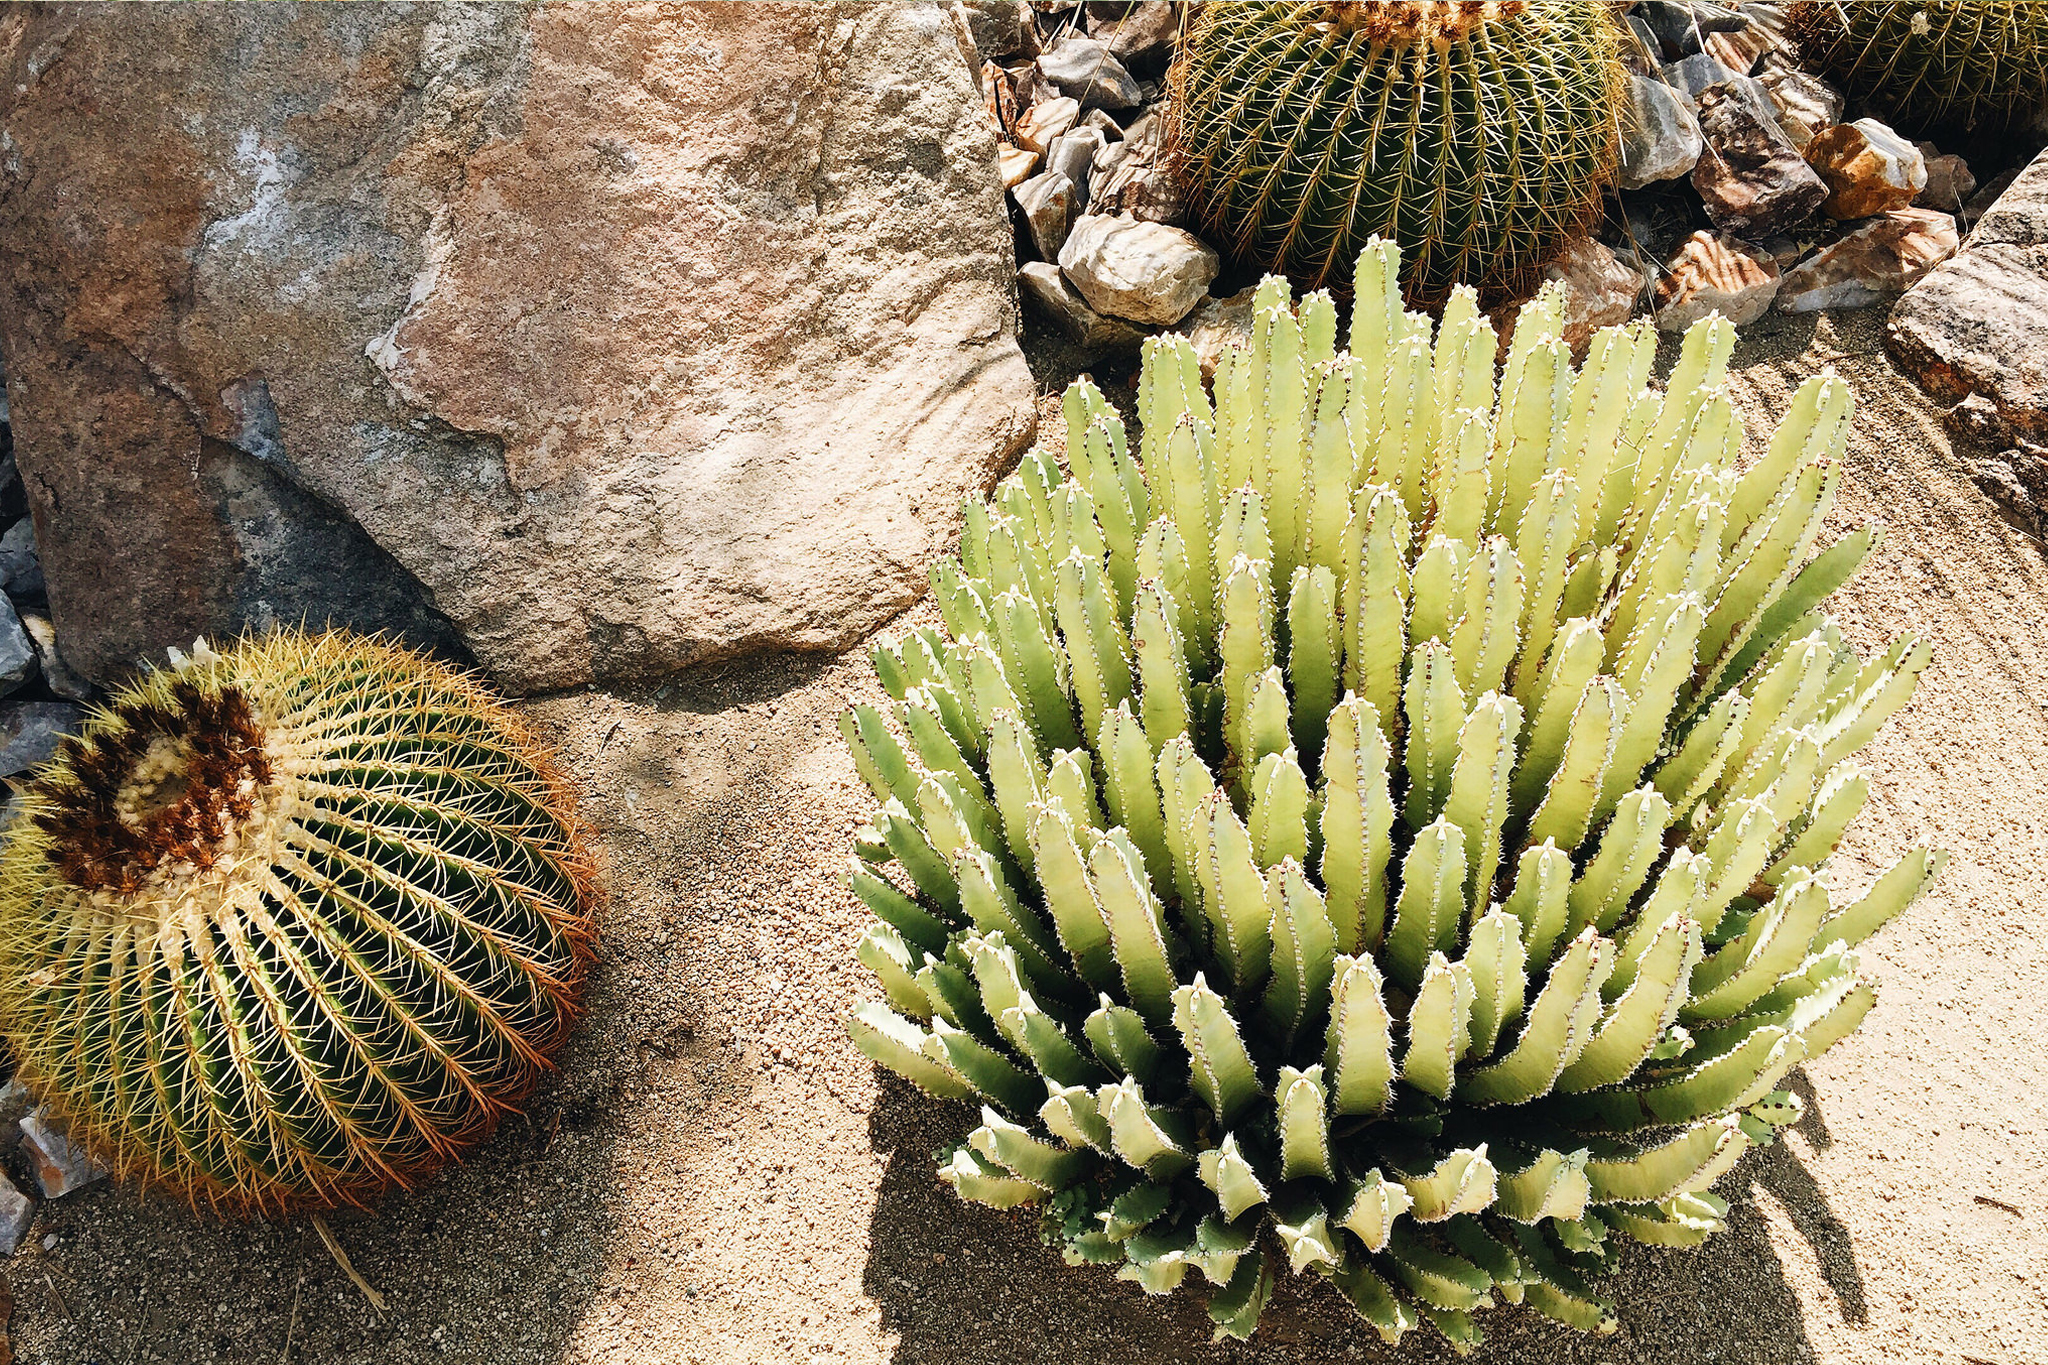 But first, cacti: